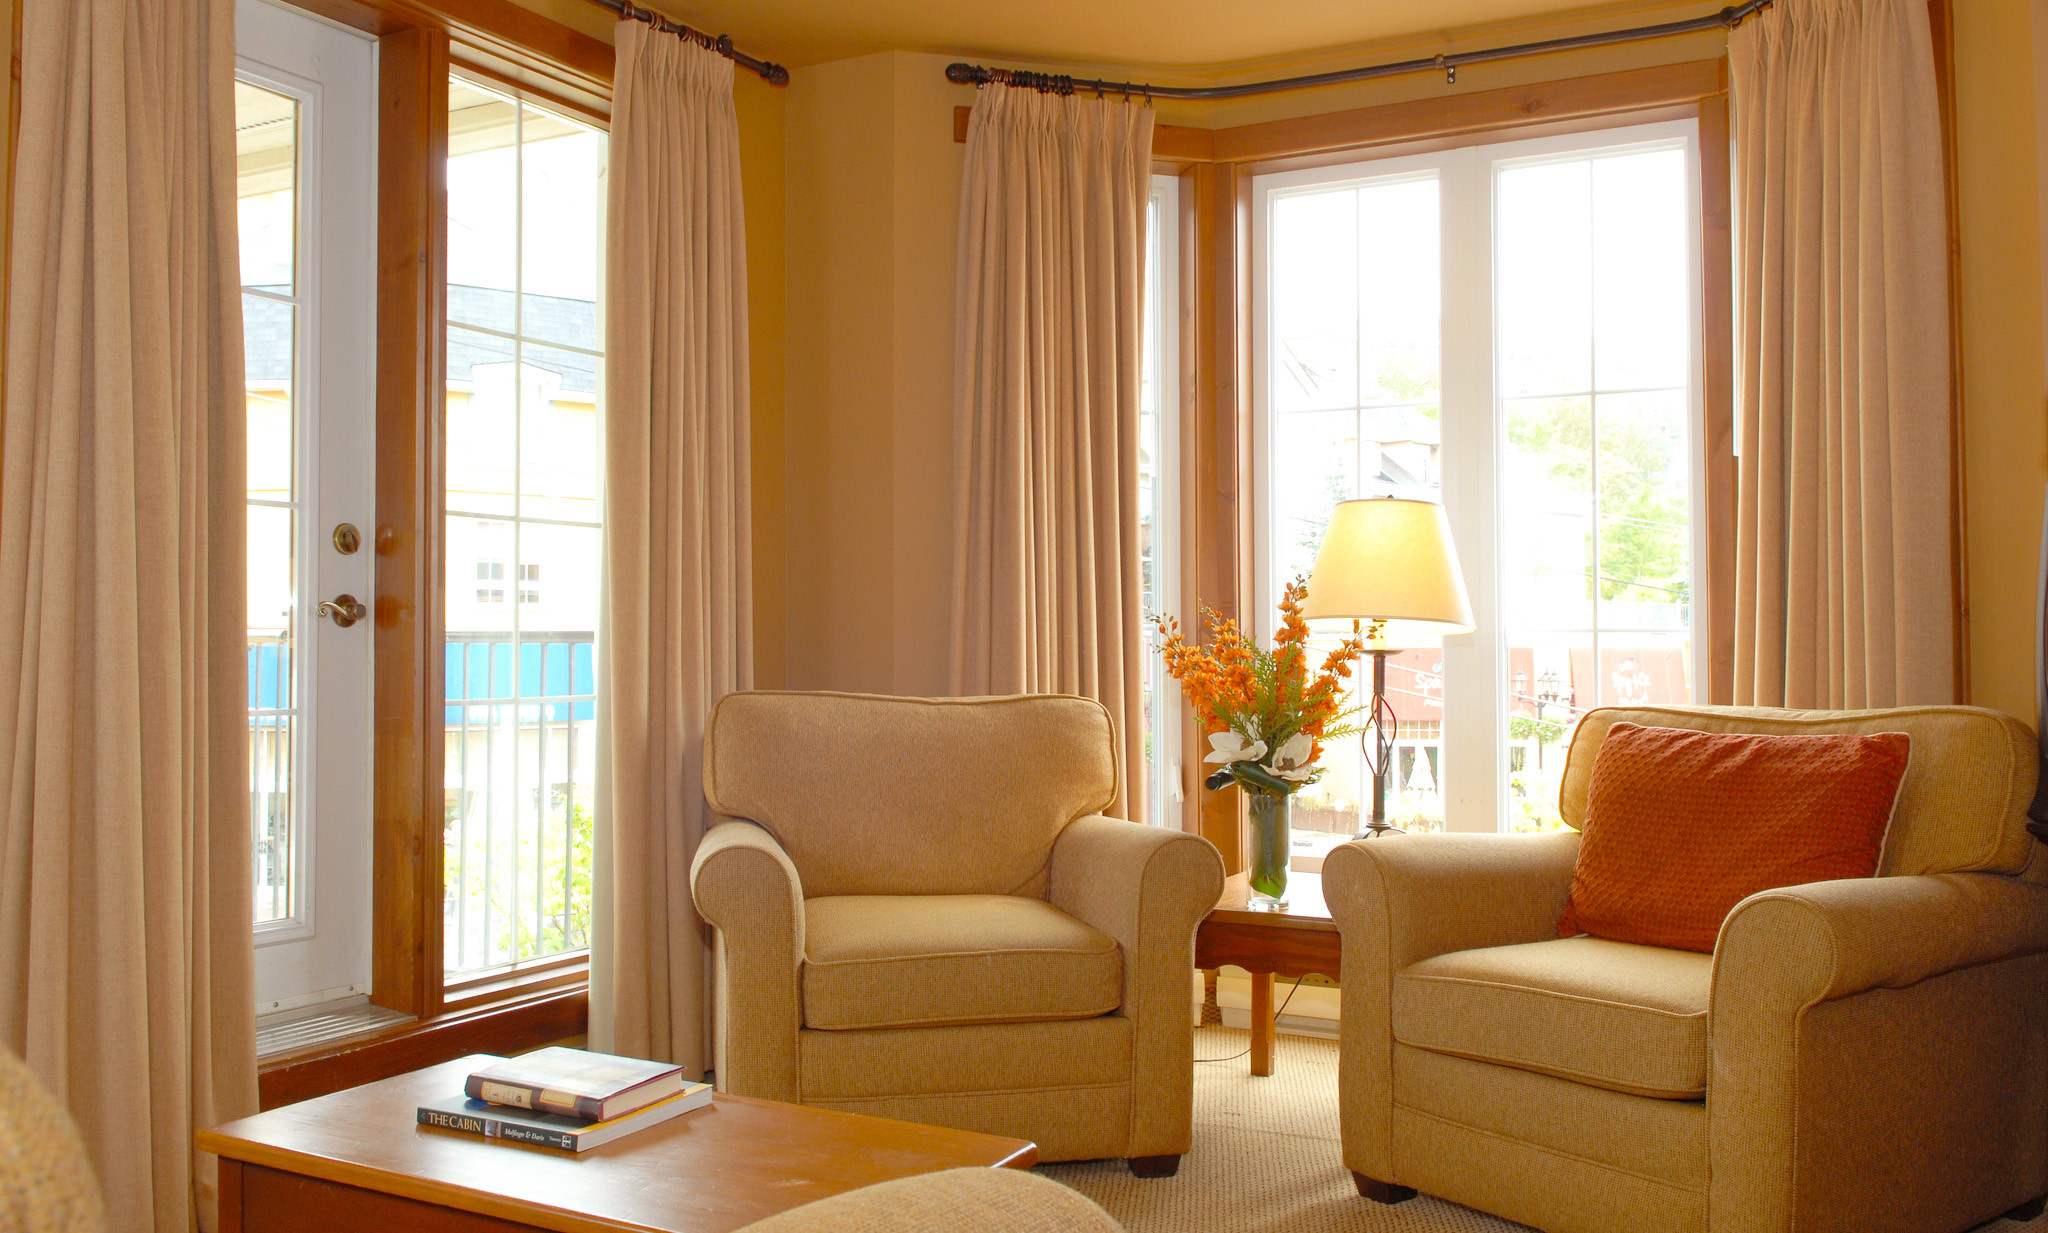 Living Room Window Curtains
 Tips for Choosing Living Room Curtain